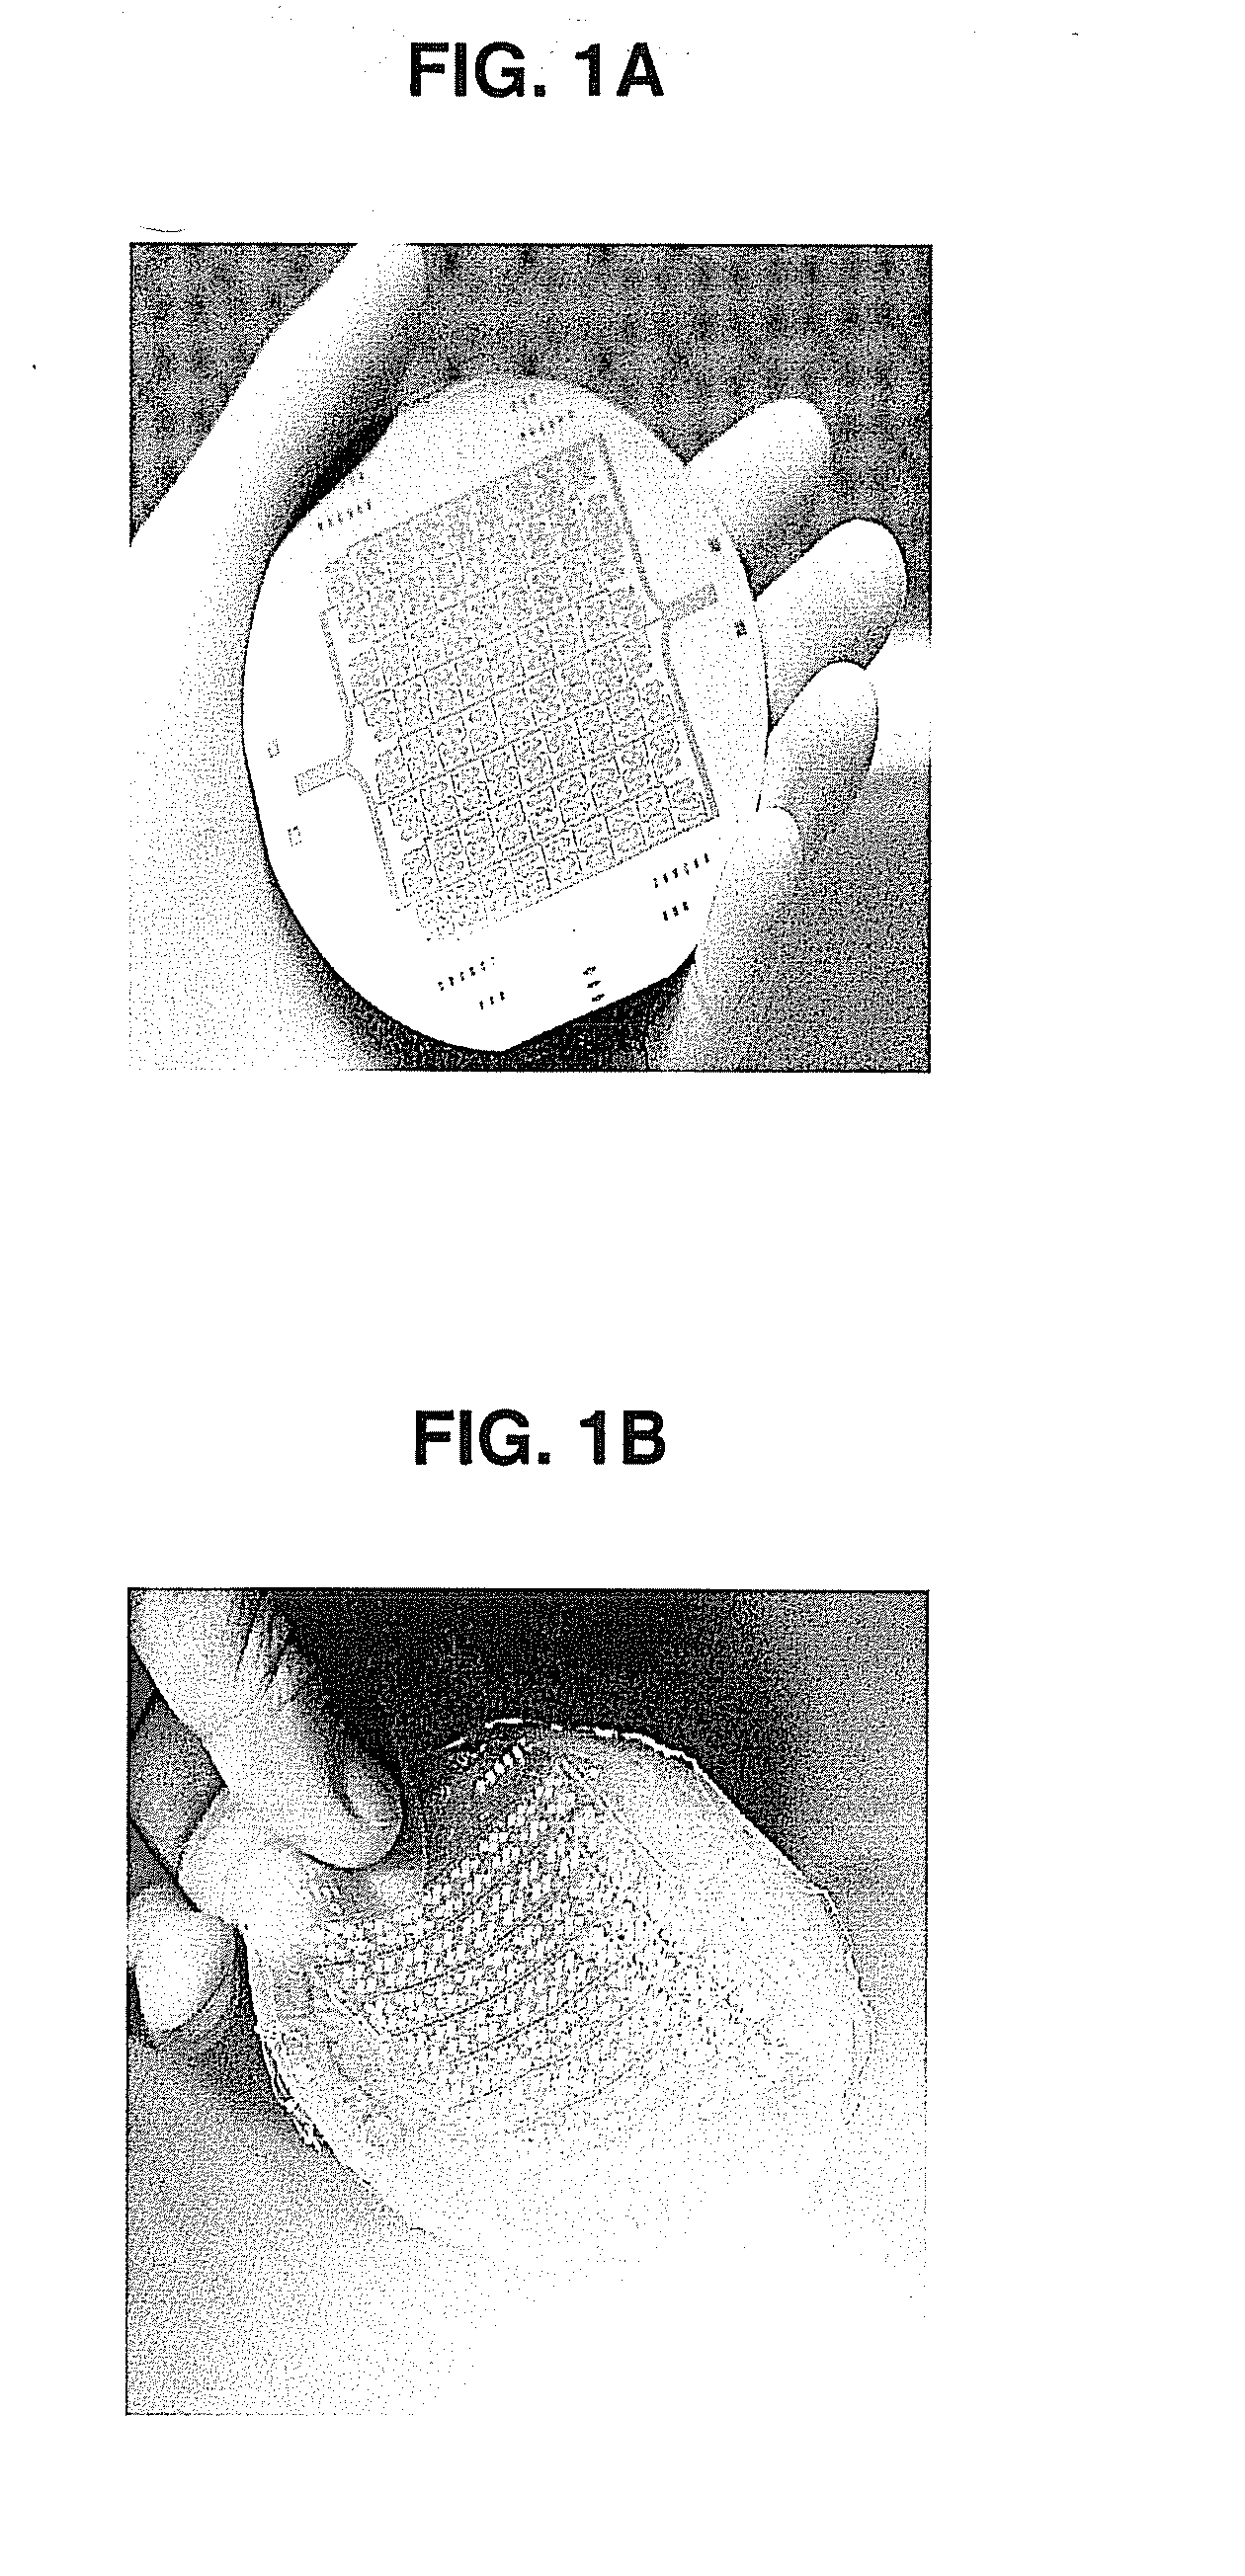 Fabrication of vascularized tissue using microfabricated two-dimensional molds